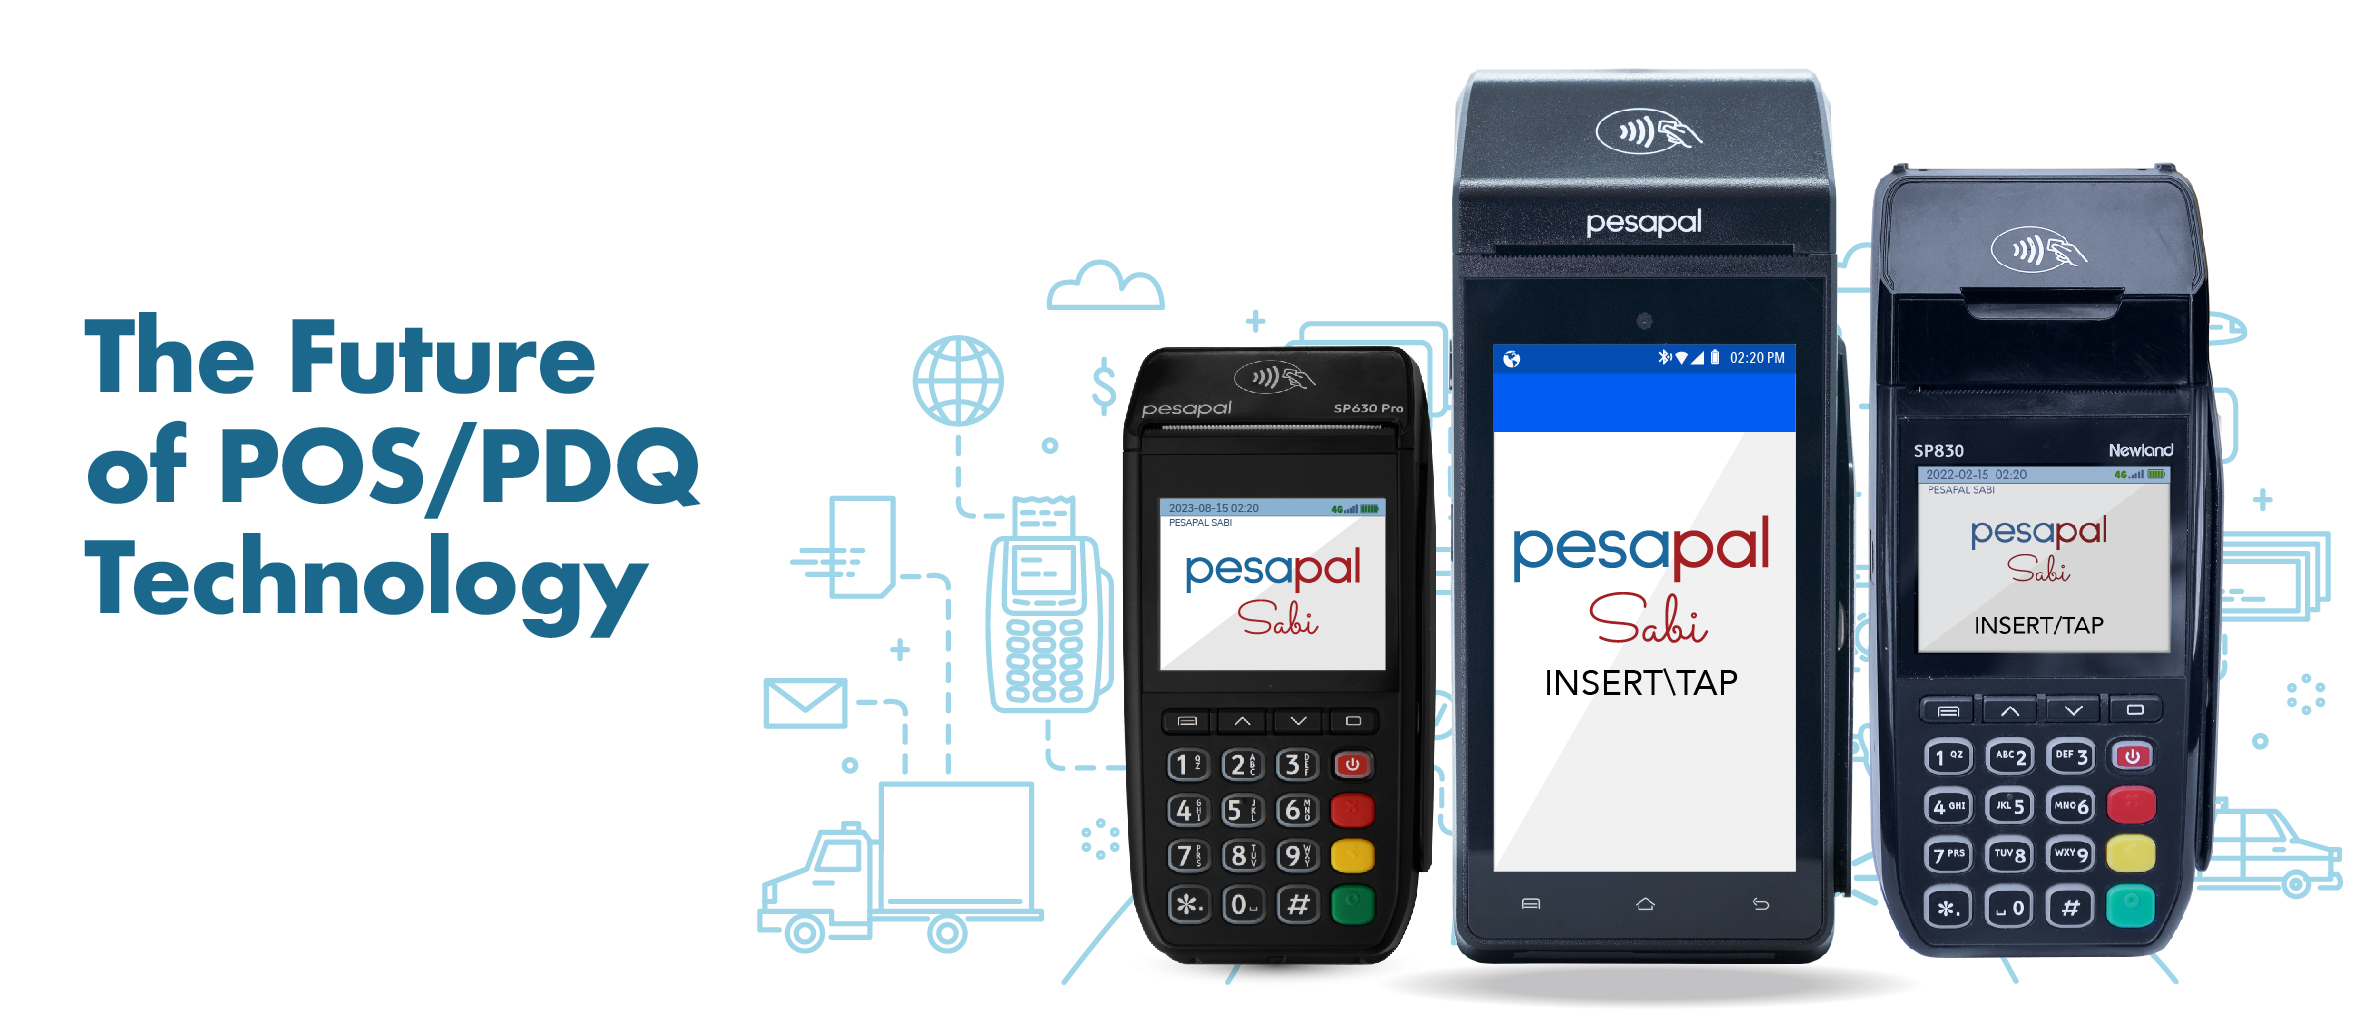 The Future of POS/PDQ Technology: What's in Store for Retailers?